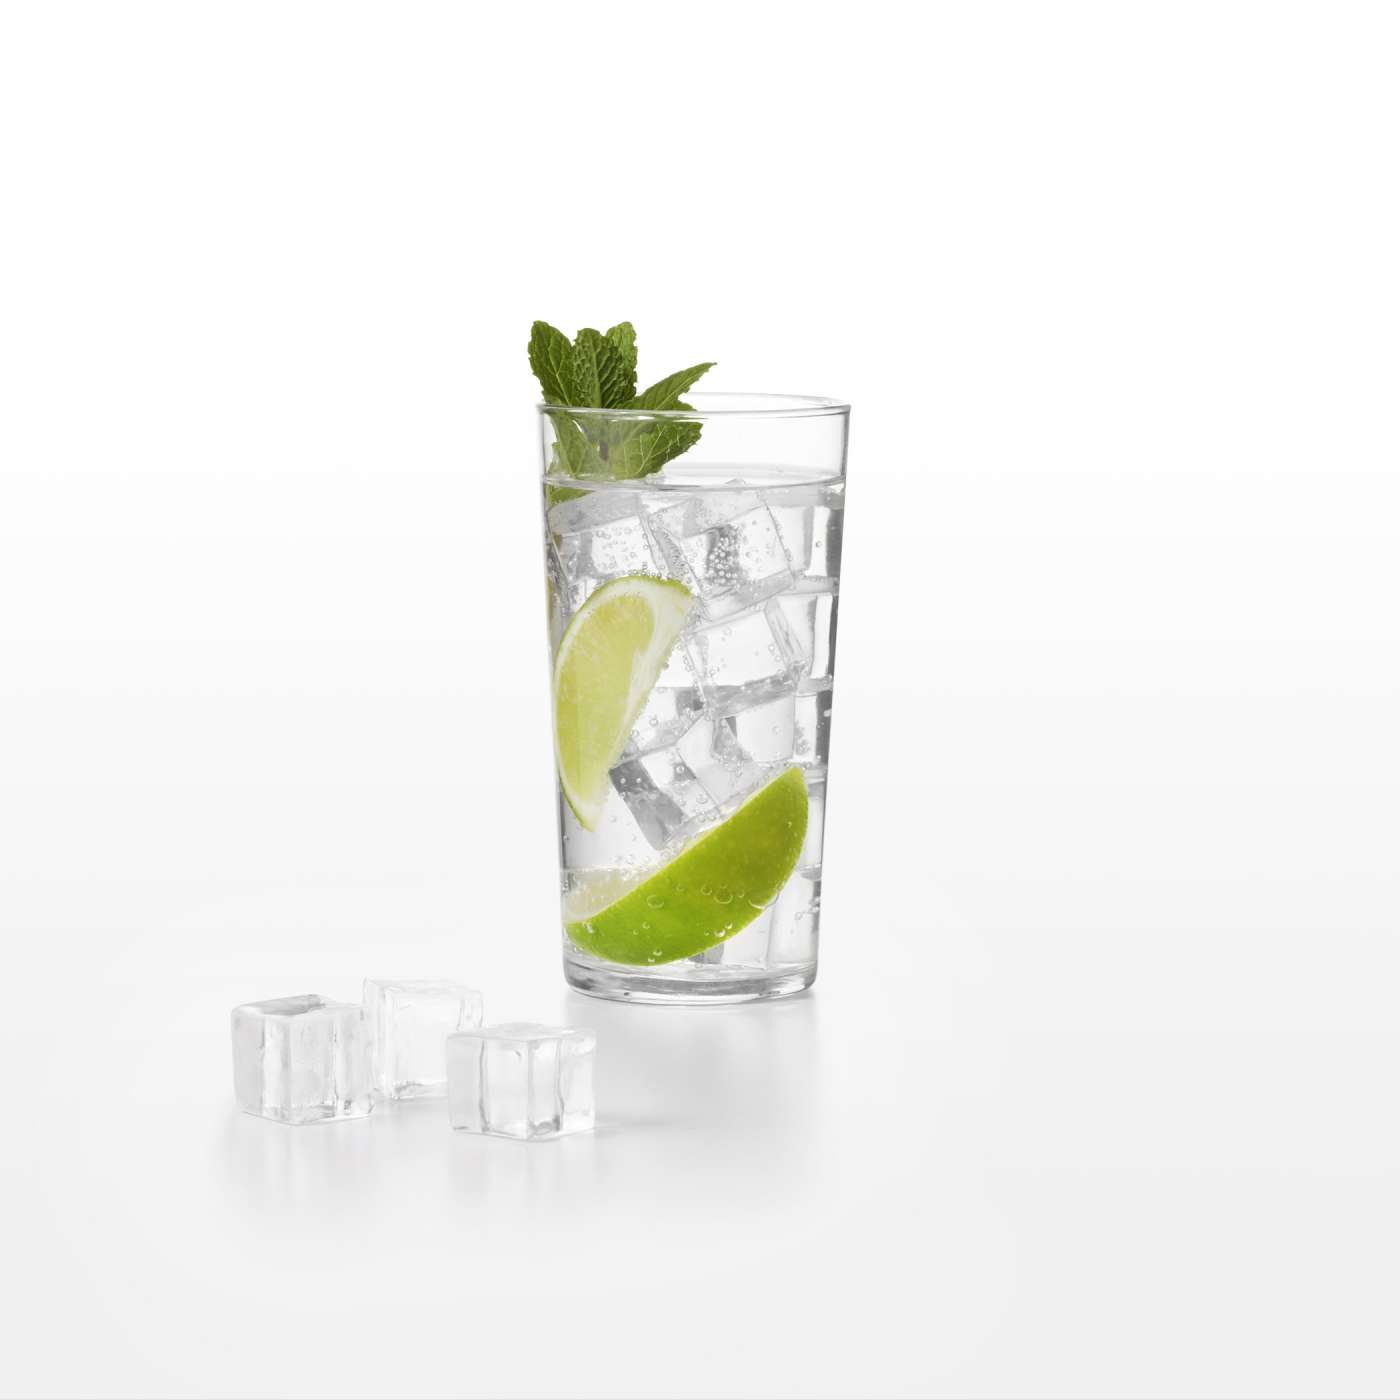 https://www.oxouk.com/wp-content/uploads/covered_silicone_ice_cube_tray-cocktail_cubes_11154300_10.jpeg